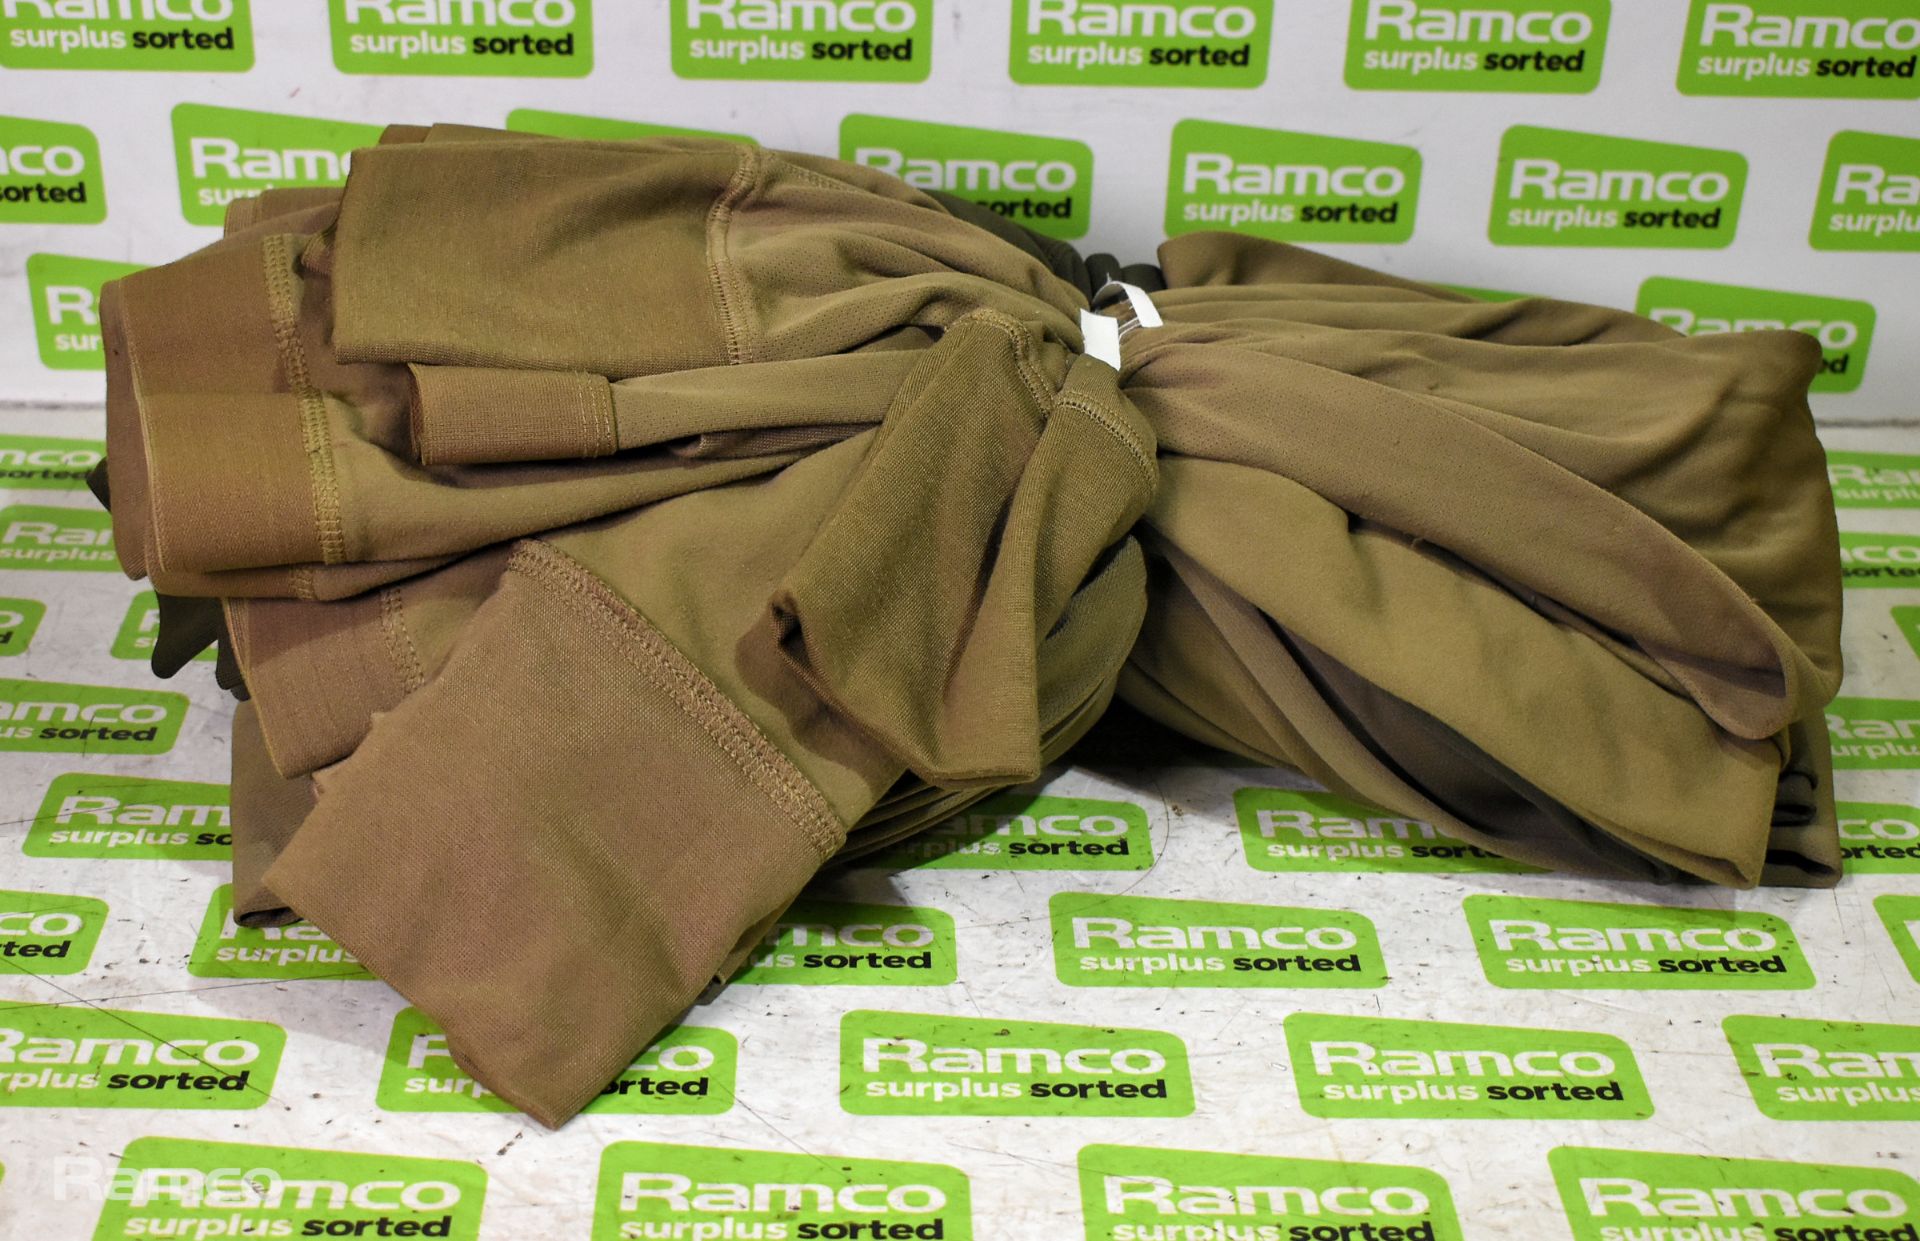 110x British Forces thermal under drawers - mixed colours - mixed sizes - mixed grades - Image 4 of 5